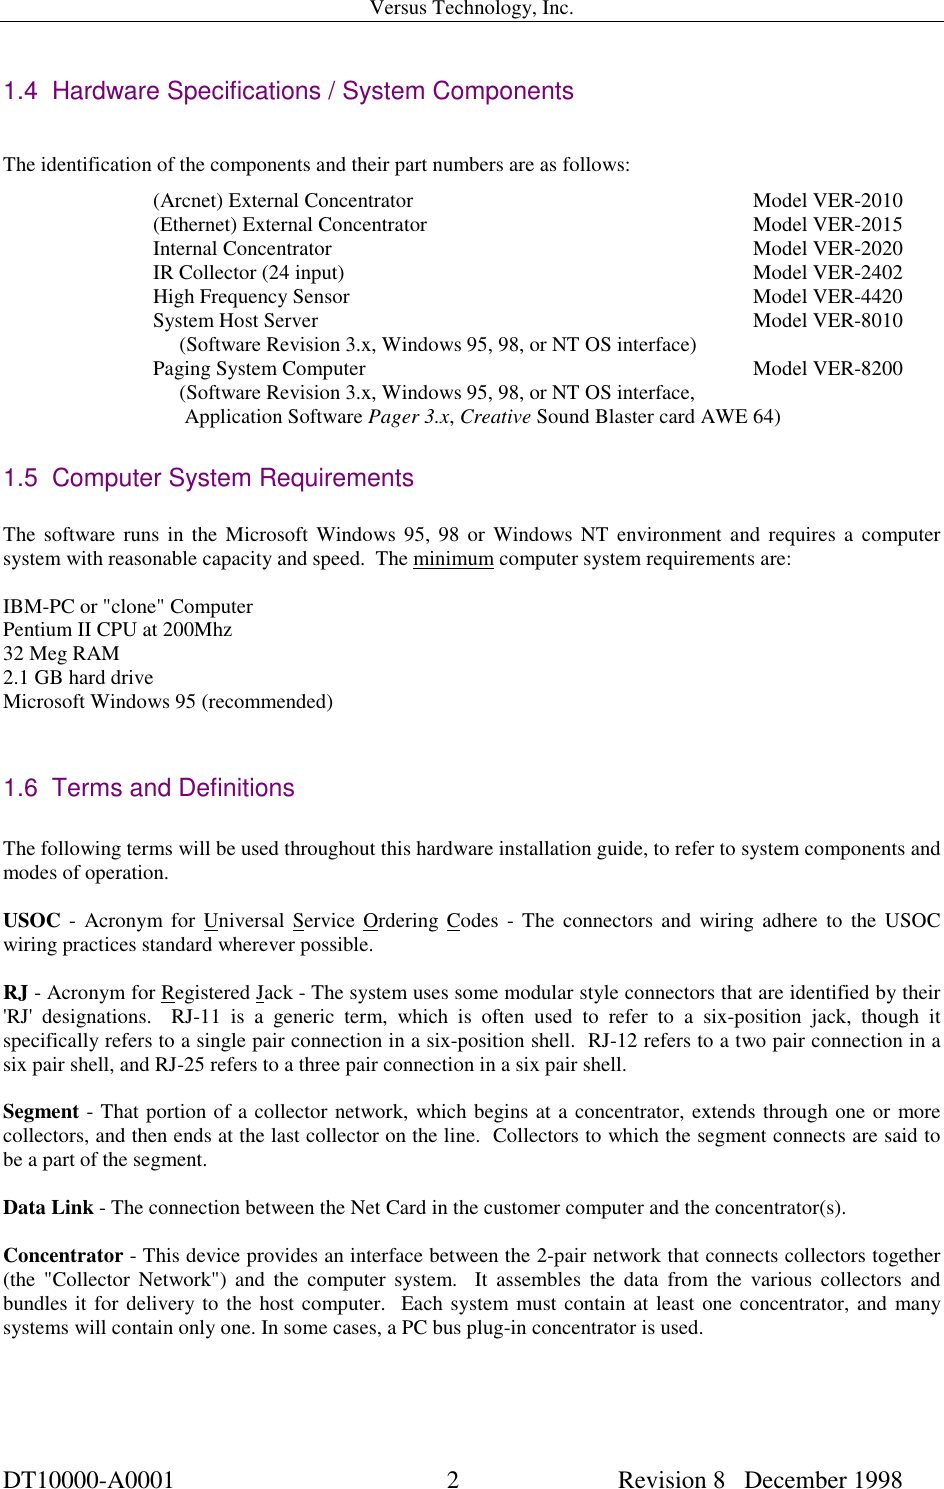 Versus Technology, Inc.DT10000-A0001 2 Revision 8   December 19981.4  Hardware Specifications / System ComponentsThe identification of the components and their part numbers are as follows:(Arcnet) External Concentrator  Model VER-2010(Ethernet) External Concentrator  Model VER-2015Internal Concentrator Model VER-2020IR Collector (24 input) Model VER-2402High Frequency Sensor          Model VER-4420System Host Server Model VER-8010     (Software Revision 3.x, Windows 95, 98, or NT OS interface)Paging System Computer Model VER-8200     (Software Revision 3.x, Windows 95, 98, or NT OS interface,      Application Software Pager 3.x, Creative Sound Blaster card AWE 64)1.5  Computer System RequirementsThe software runs in the Microsoft Windows 95, 98 or Windows NT environment and requires a computersystem with reasonable capacity and speed.  The minimum computer system requirements are:IBM-PC or &quot;clone&quot; ComputerPentium II CPU at 200Mhz32 Meg RAM2.1 GB hard driveMicrosoft Windows 95 (recommended)1.6  Terms and DefinitionsThe following terms will be used throughout this hardware installation guide, to refer to system components andmodes of operation.USOC - Acronym for Universal Service Ordering Codes - The connectors and wiring adhere to the USOCwiring practices standard wherever possible.RJ - Acronym for Registered Jack - The system uses some modular style connectors that are identified by their&apos;RJ&apos; designations.  RJ-11 is a generic term, which is often used to refer to a six-position jack, though itspecifically refers to a single pair connection in a six-position shell.  RJ-12 refers to a two pair connection in asix pair shell, and RJ-25 refers to a three pair connection in a six pair shell.Segment - That portion of a collector network, which begins at a concentrator, extends through one or morecollectors, and then ends at the last collector on the line.  Collectors to which the segment connects are said tobe a part of the segment.Data Link - The connection between the Net Card in the customer computer and the concentrator(s).Concentrator - This device provides an interface between the 2-pair network that connects collectors together(the &quot;Collector Network&quot;) and the computer system.  It assembles the data from the various collectors andbundles it for delivery to the host computer.  Each system must contain at least one concentrator, and manysystems will contain only one. In some cases, a PC bus plug-in concentrator is used.